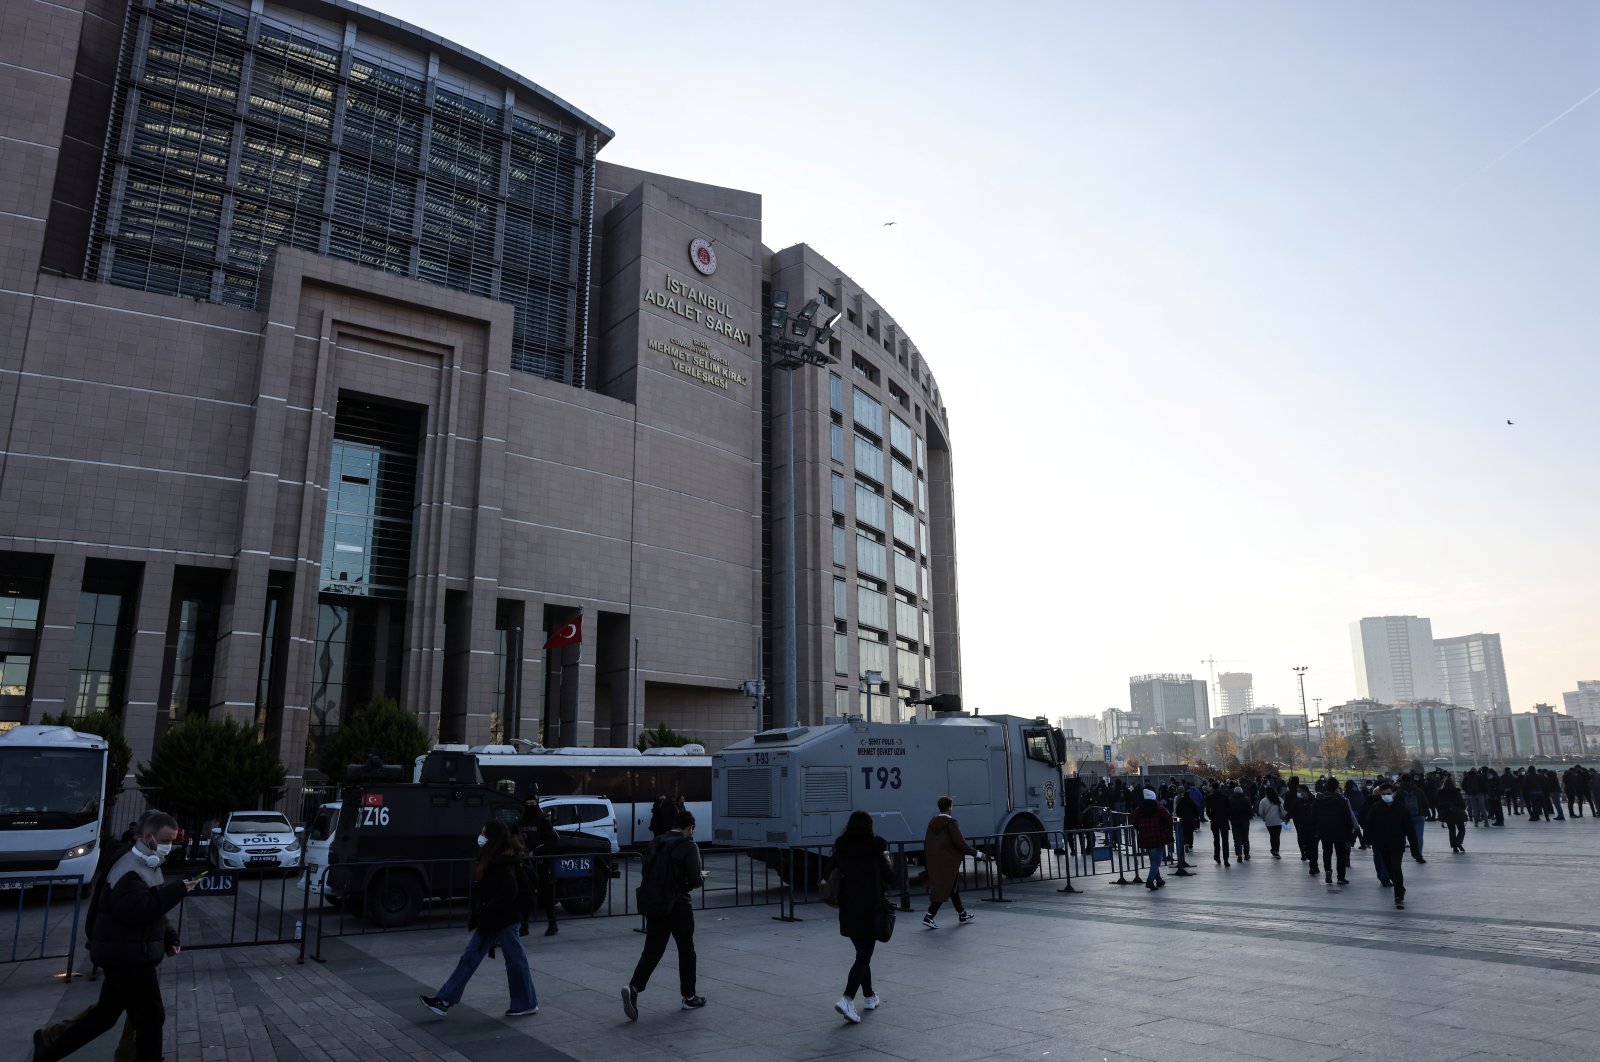 Riot police secure the Justice Palace as a Turkish court holds a hearing of Osman Kavala and 15 others over their role in the Gezi protests in 2013, in Istanbul, Turkey, Nov. 26, 2021. (REUTERS Photo)